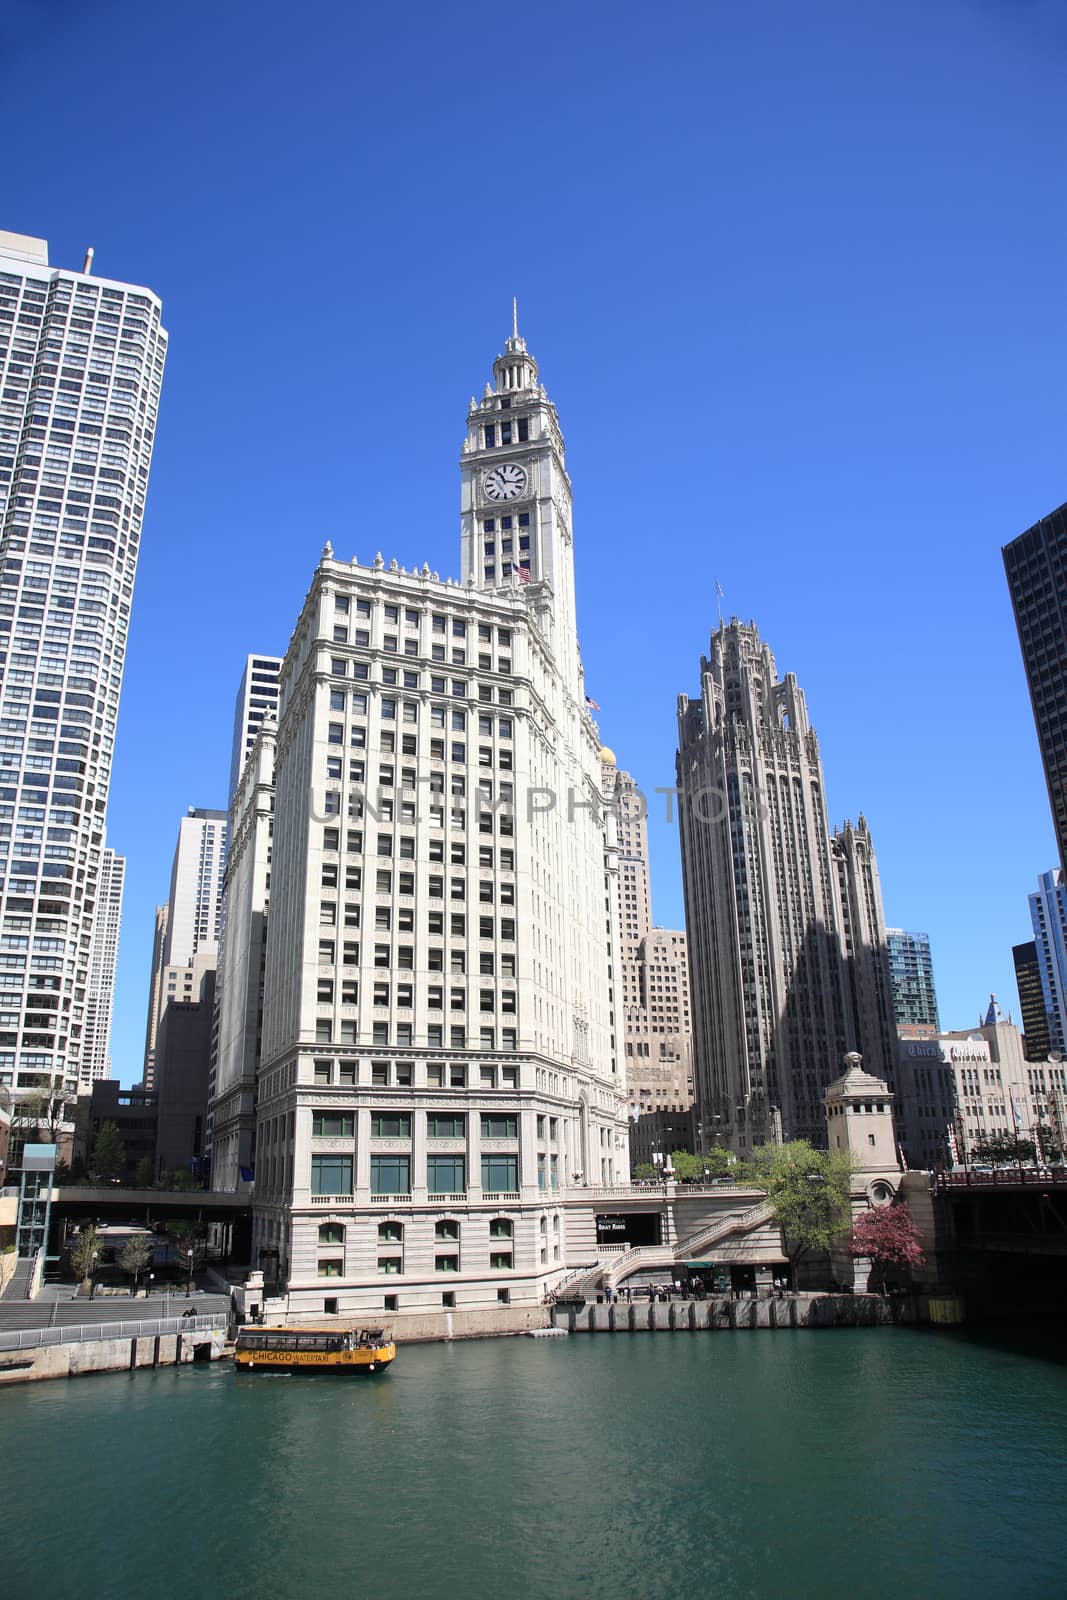 Wrigley Building in Chicago by Ffooter